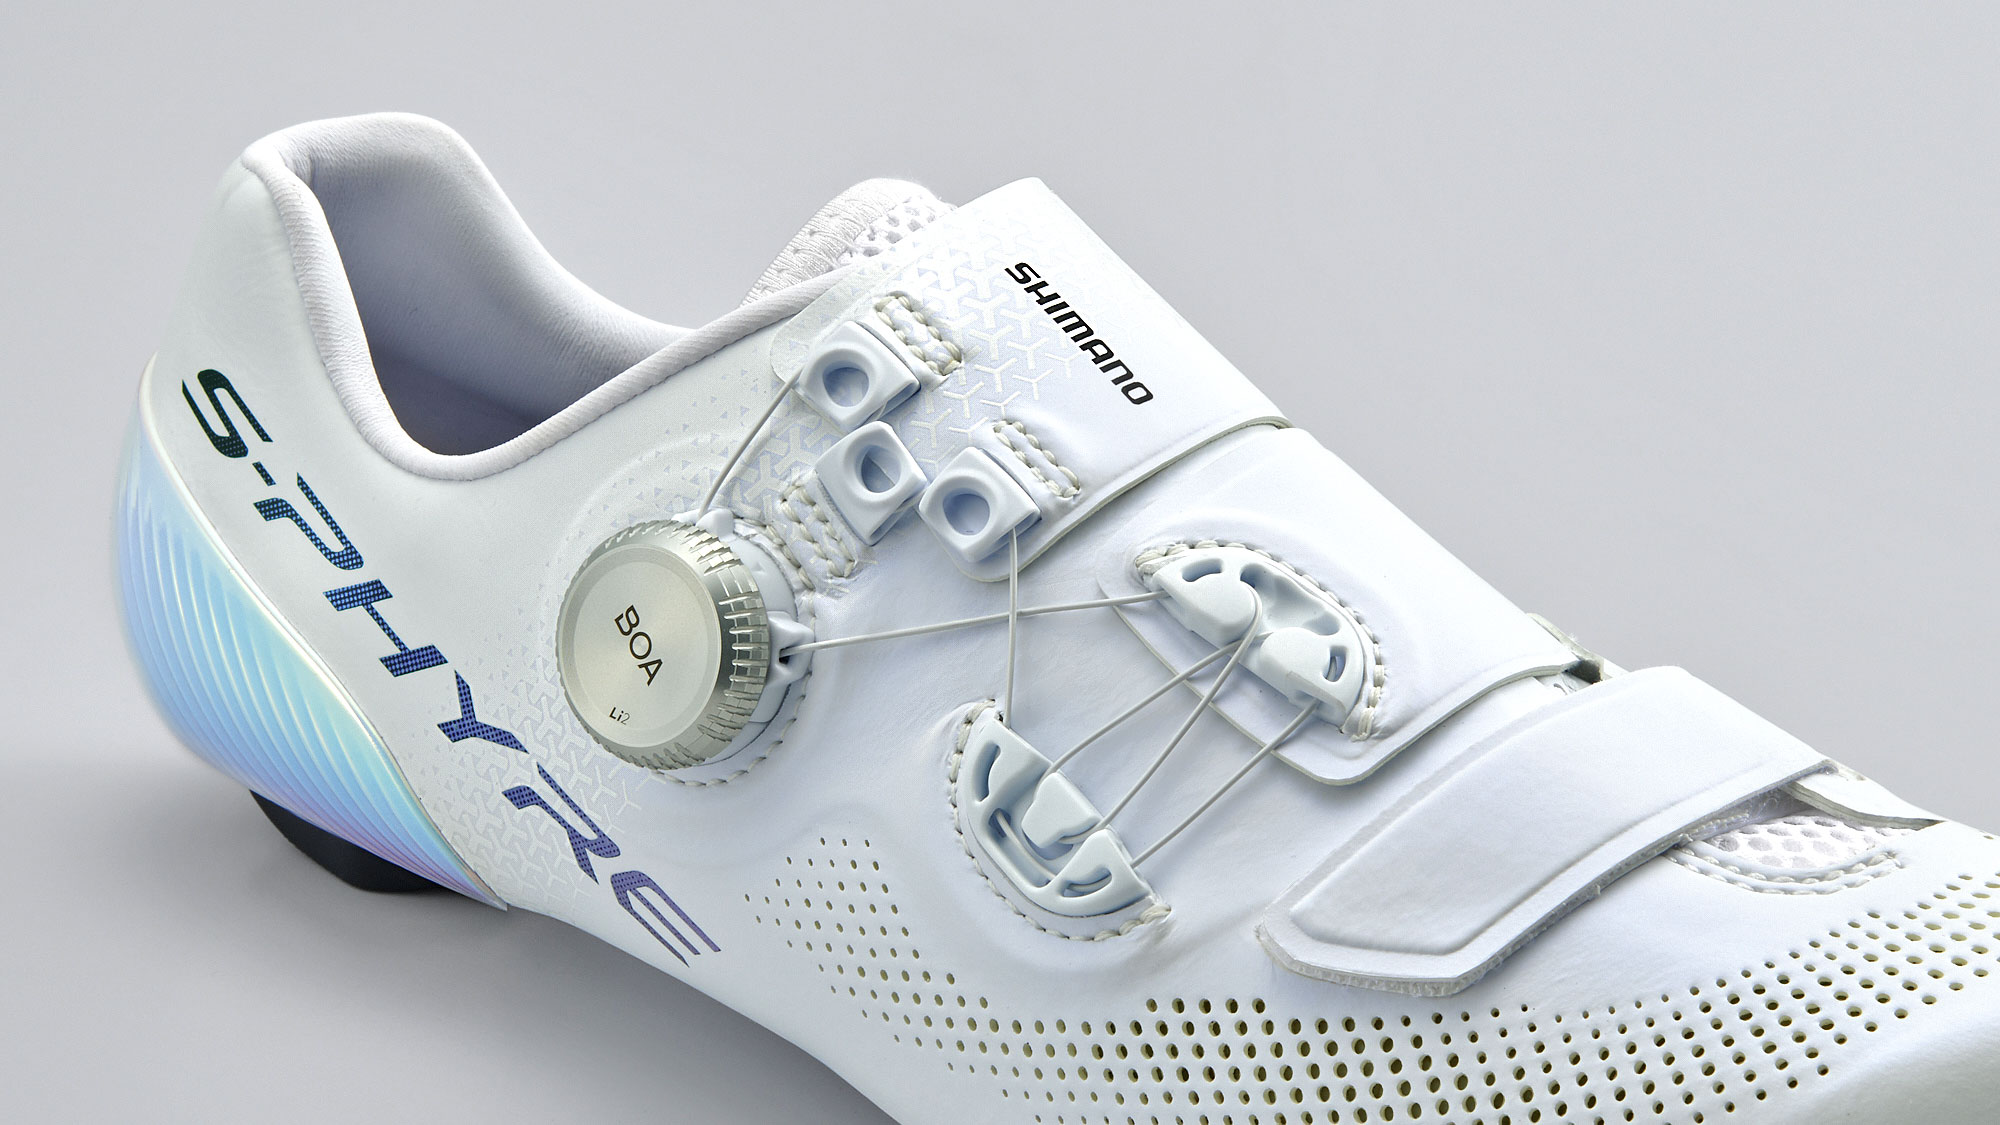 Shimano S-Phyre RC9 PWR, updated RC903PWR road bike shoes for sprinters, time-trialists & track racers, lacing detail